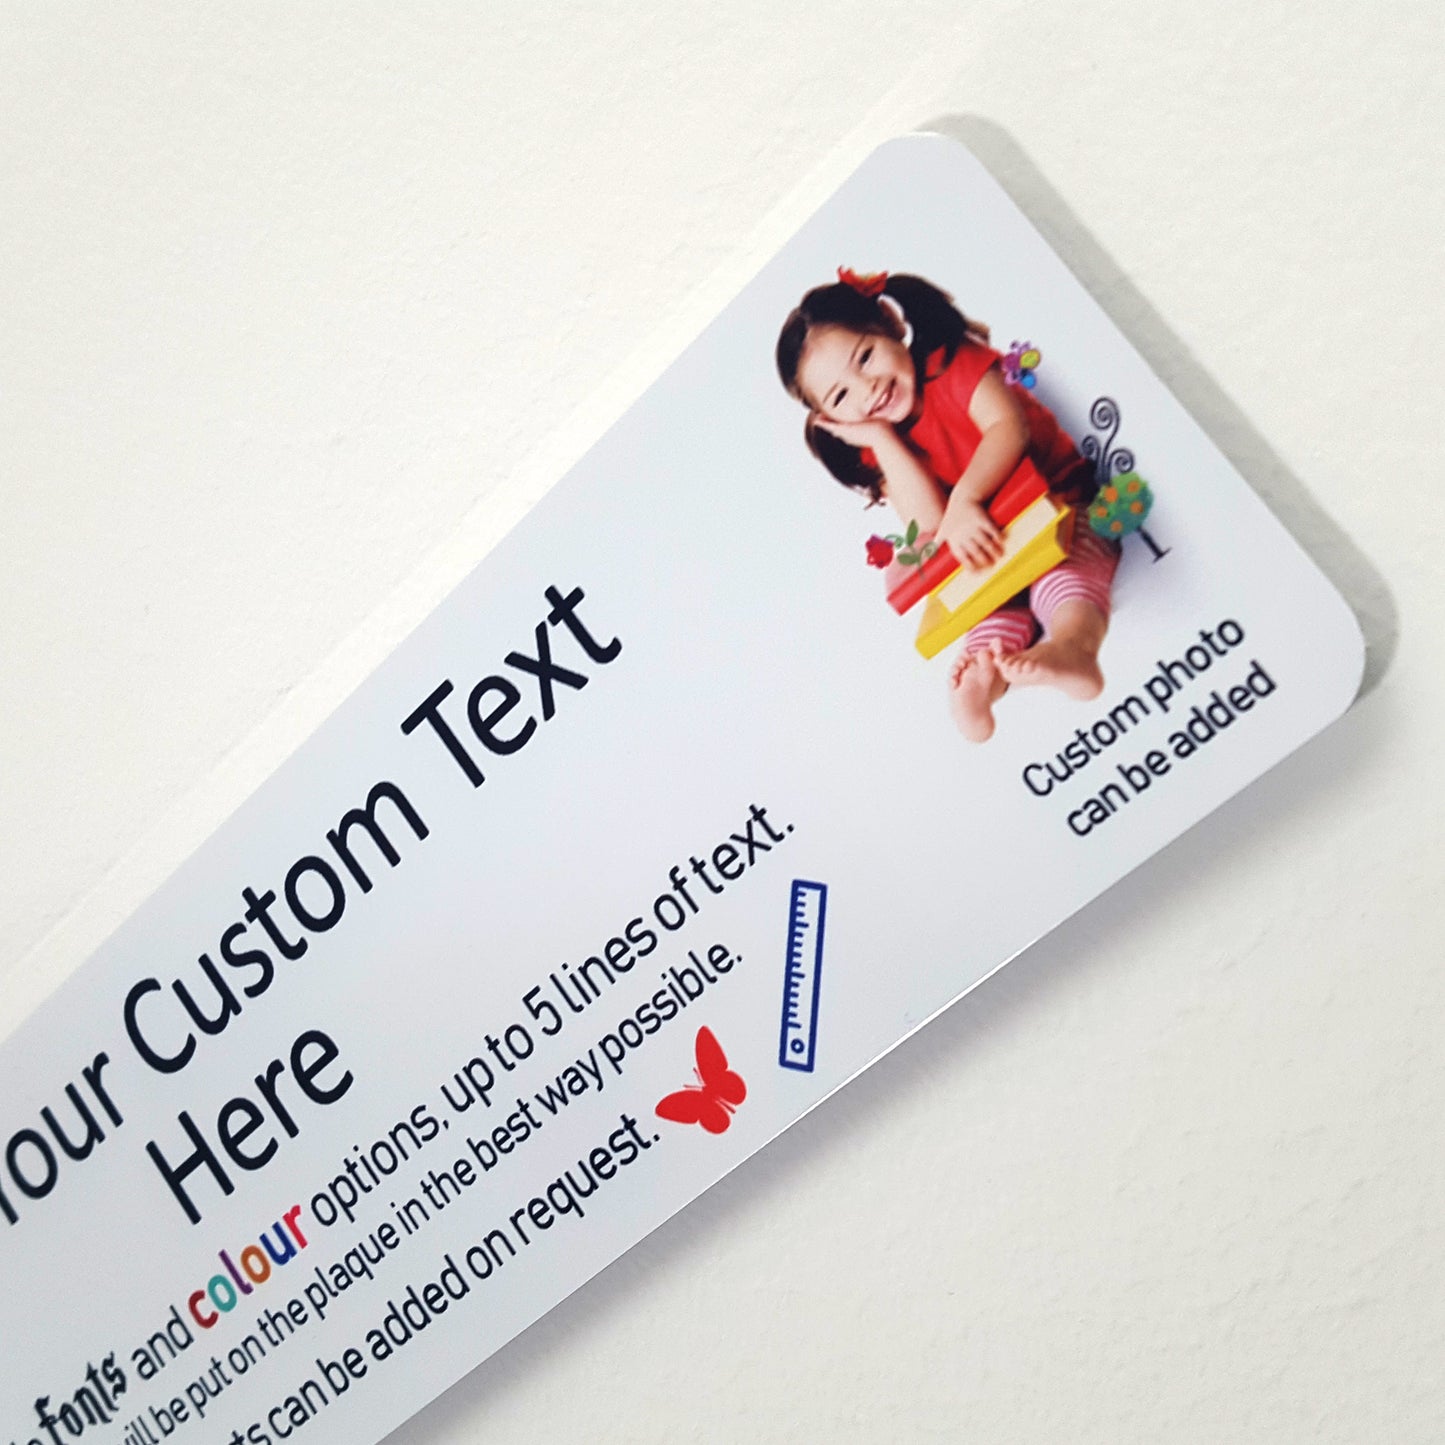 Full Customisable White Metal Plaque - Text + Pictures (20x5 cm, 7.8x2 inches)